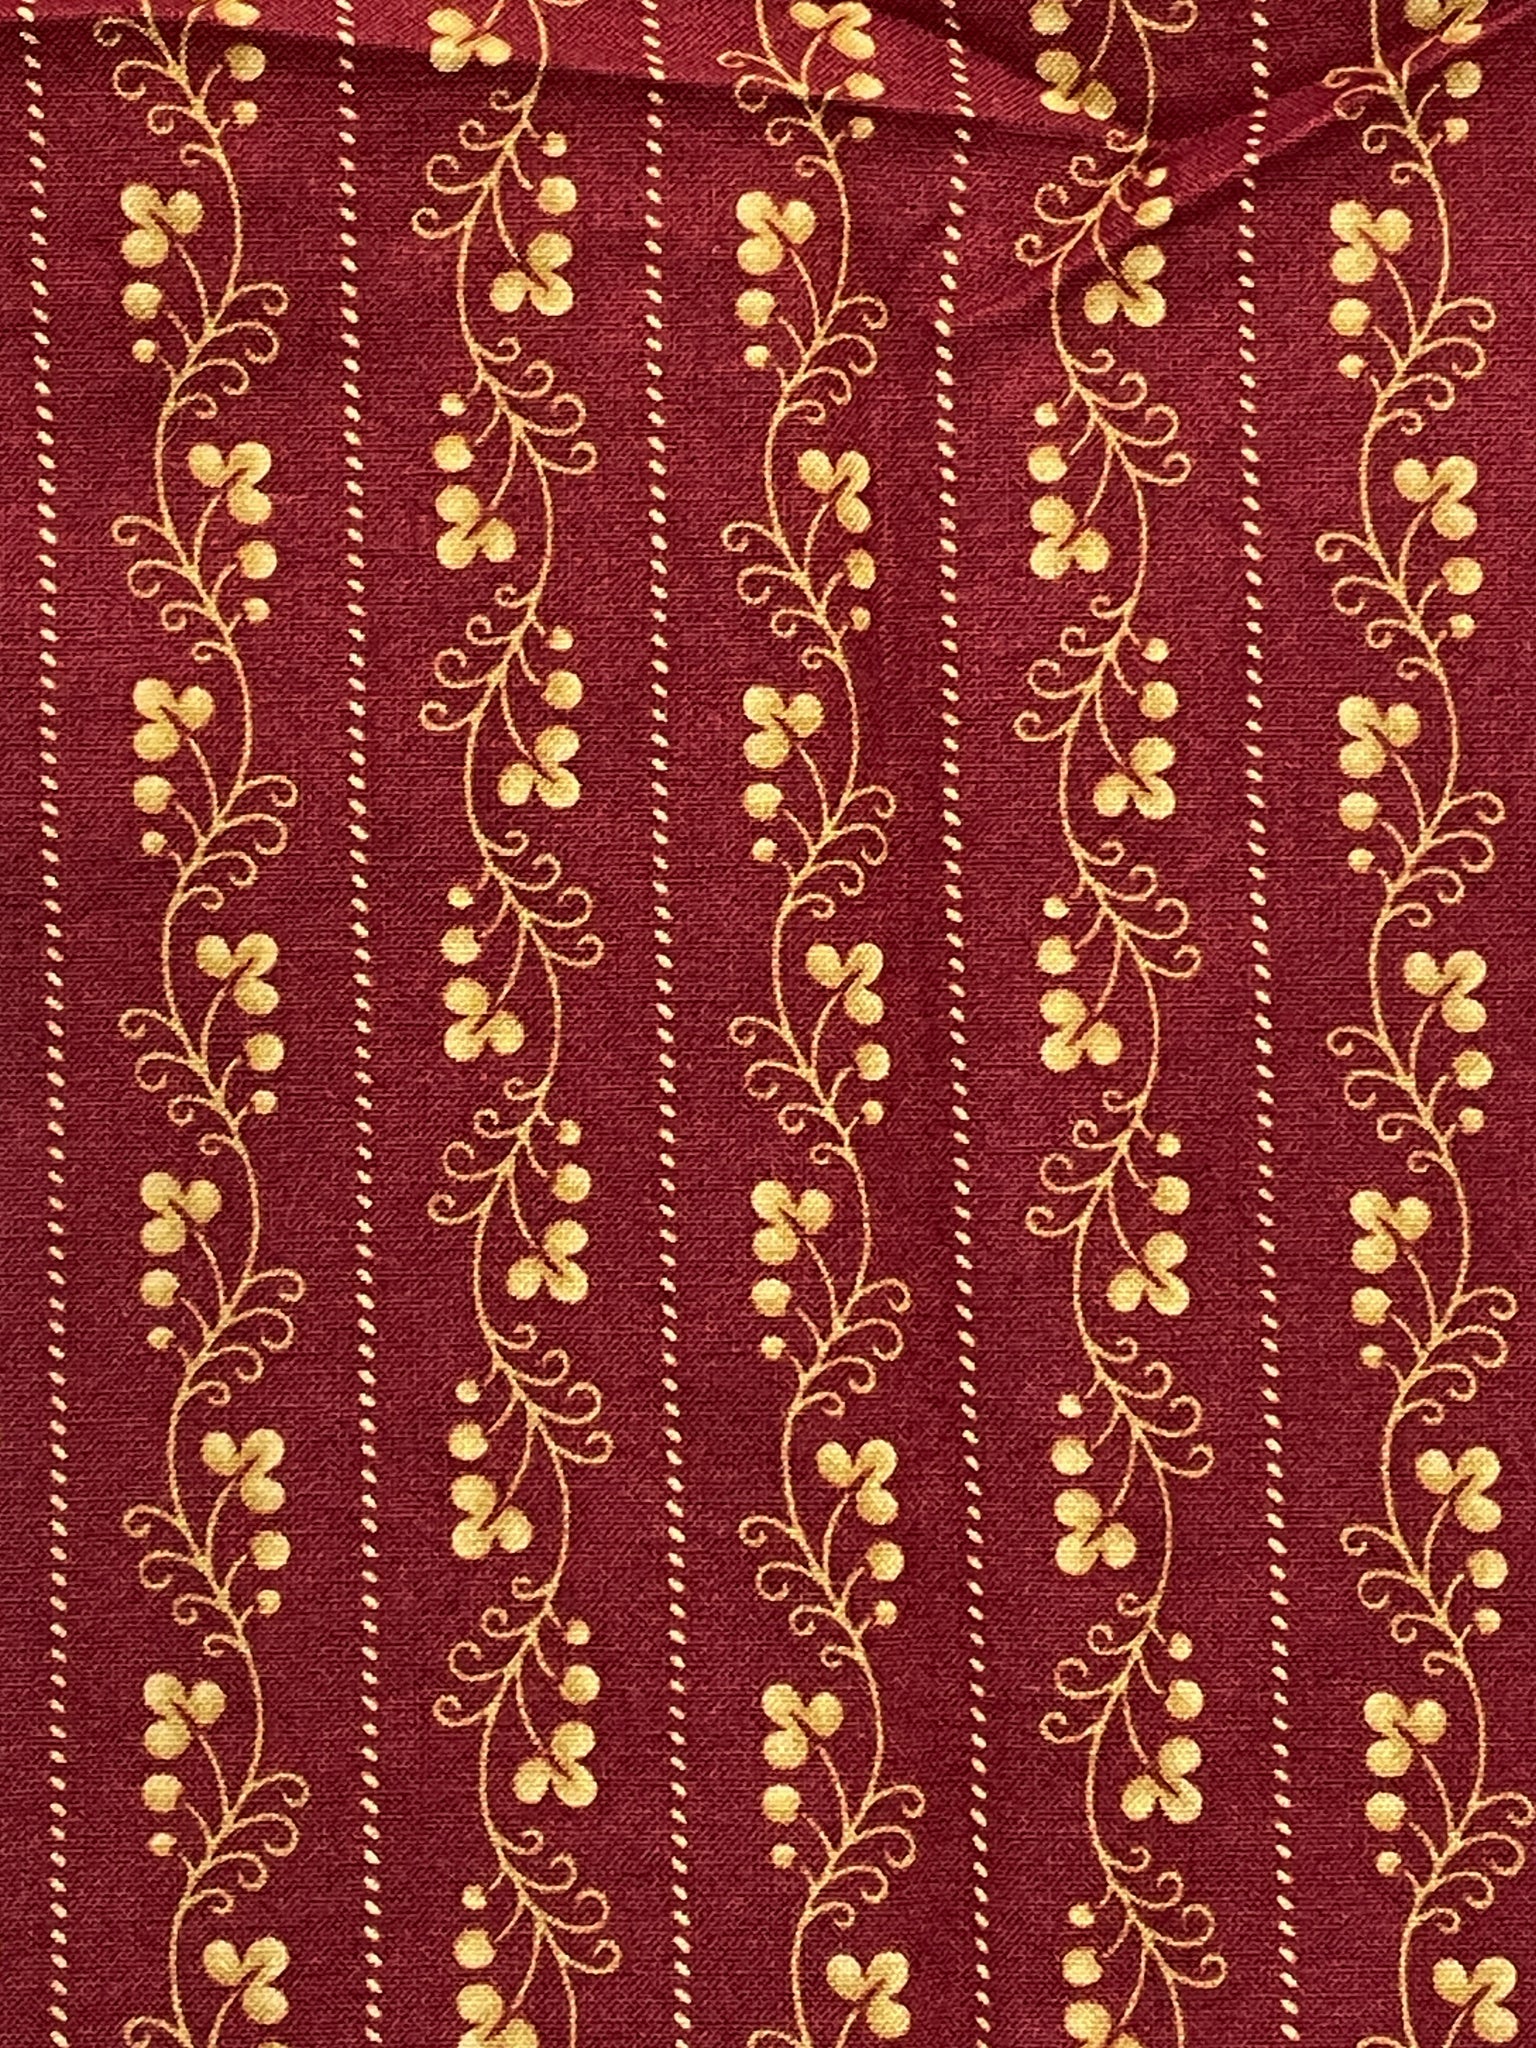 1 YD Quilting Cotton - Maroon with Dark Yellow Berries